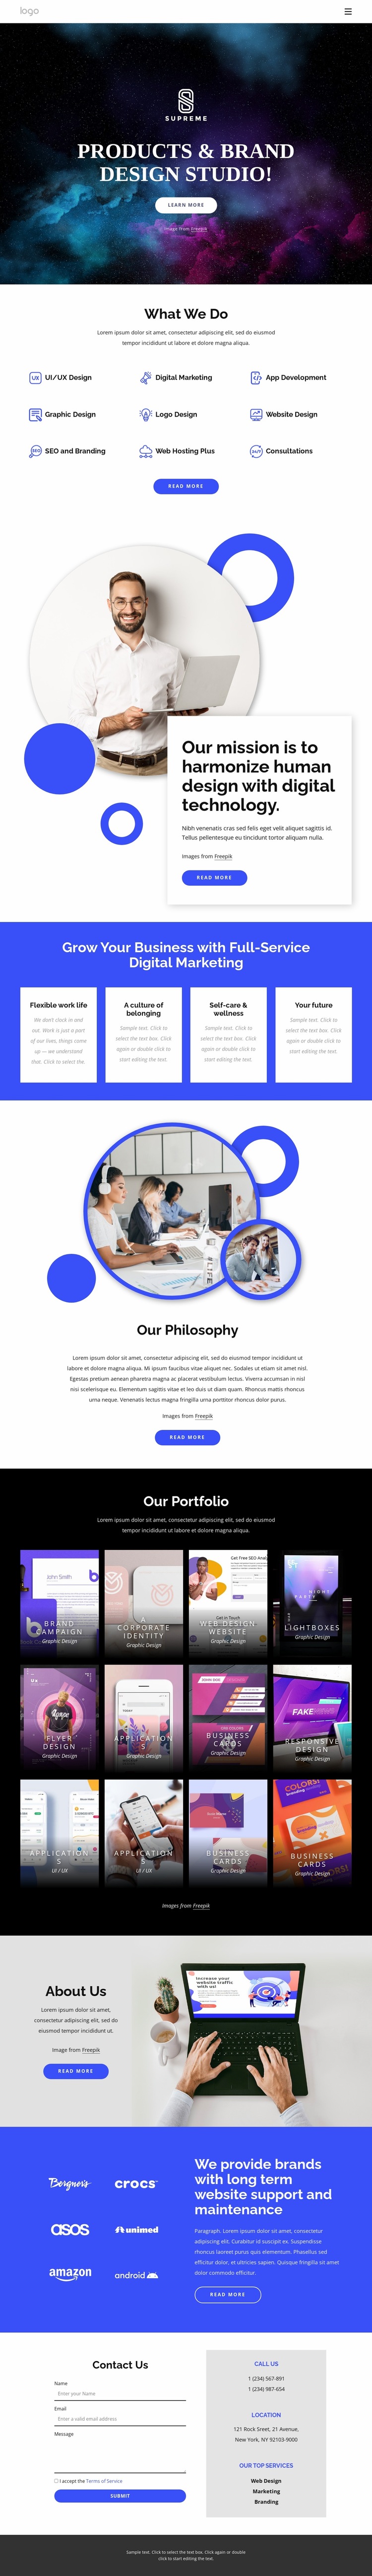 Products and brand design studio Website Builder Templates